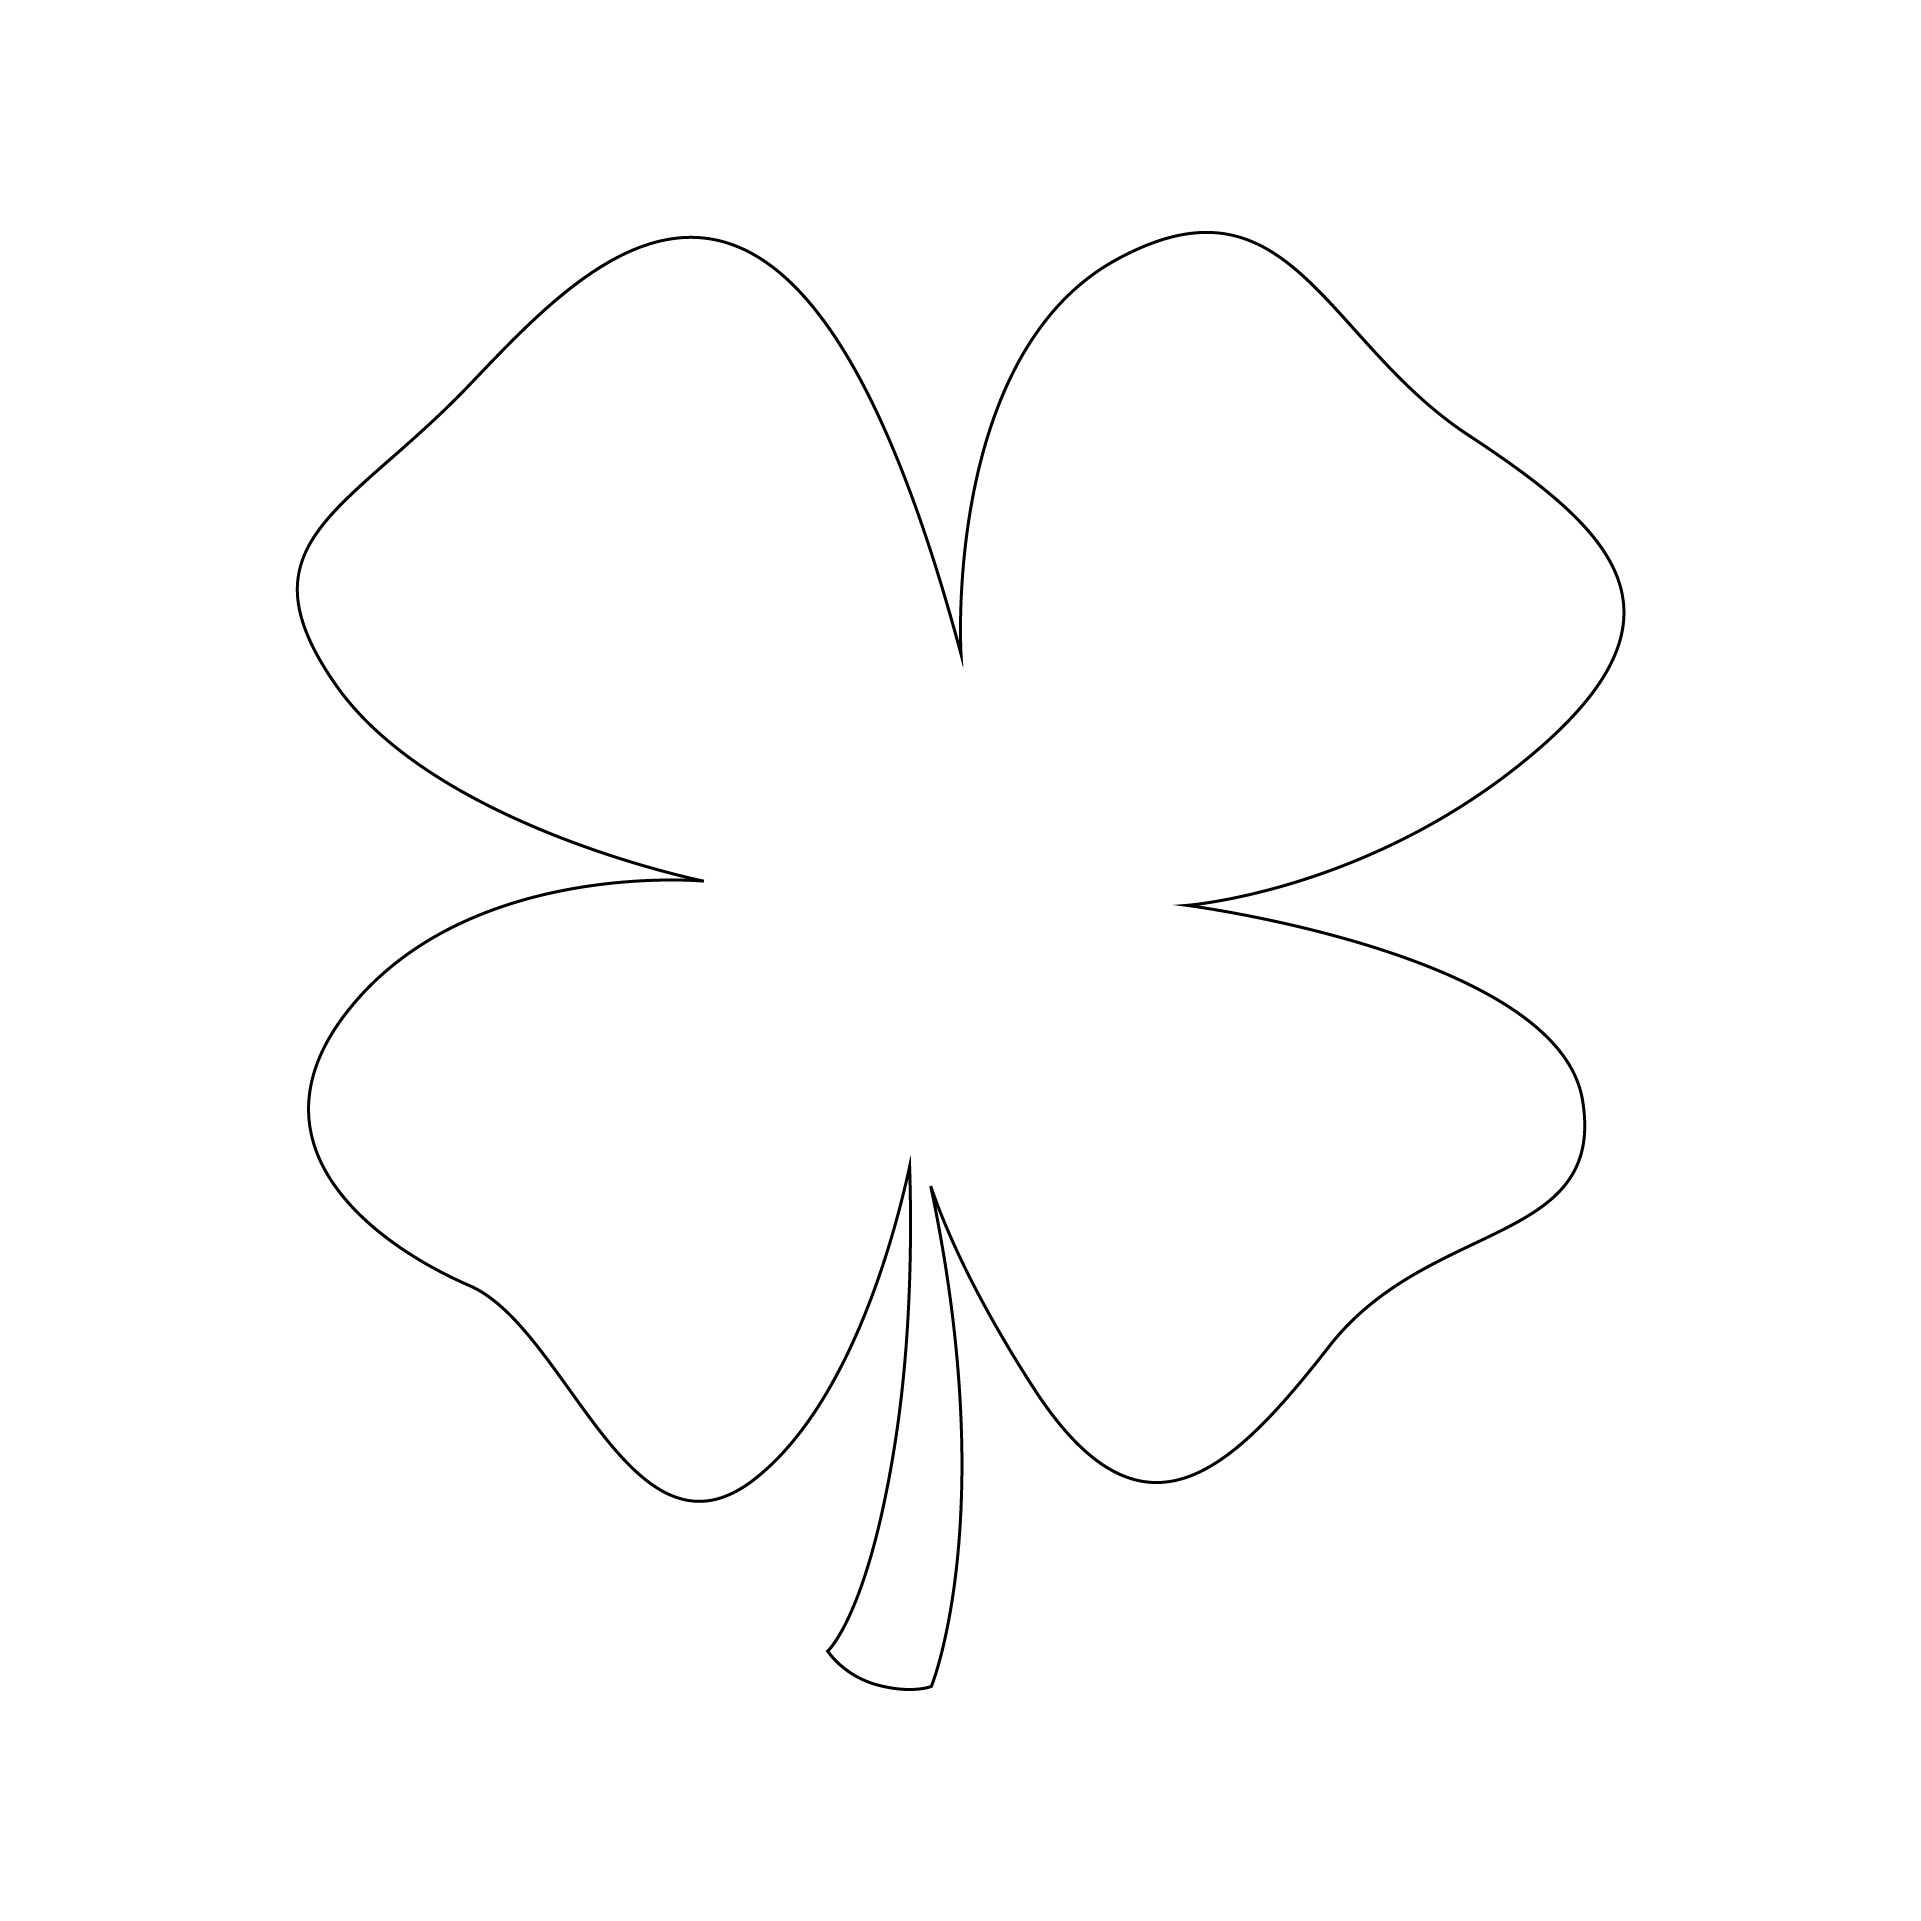 download-and-share-clipart-about-love-free-printable-shamrock-template